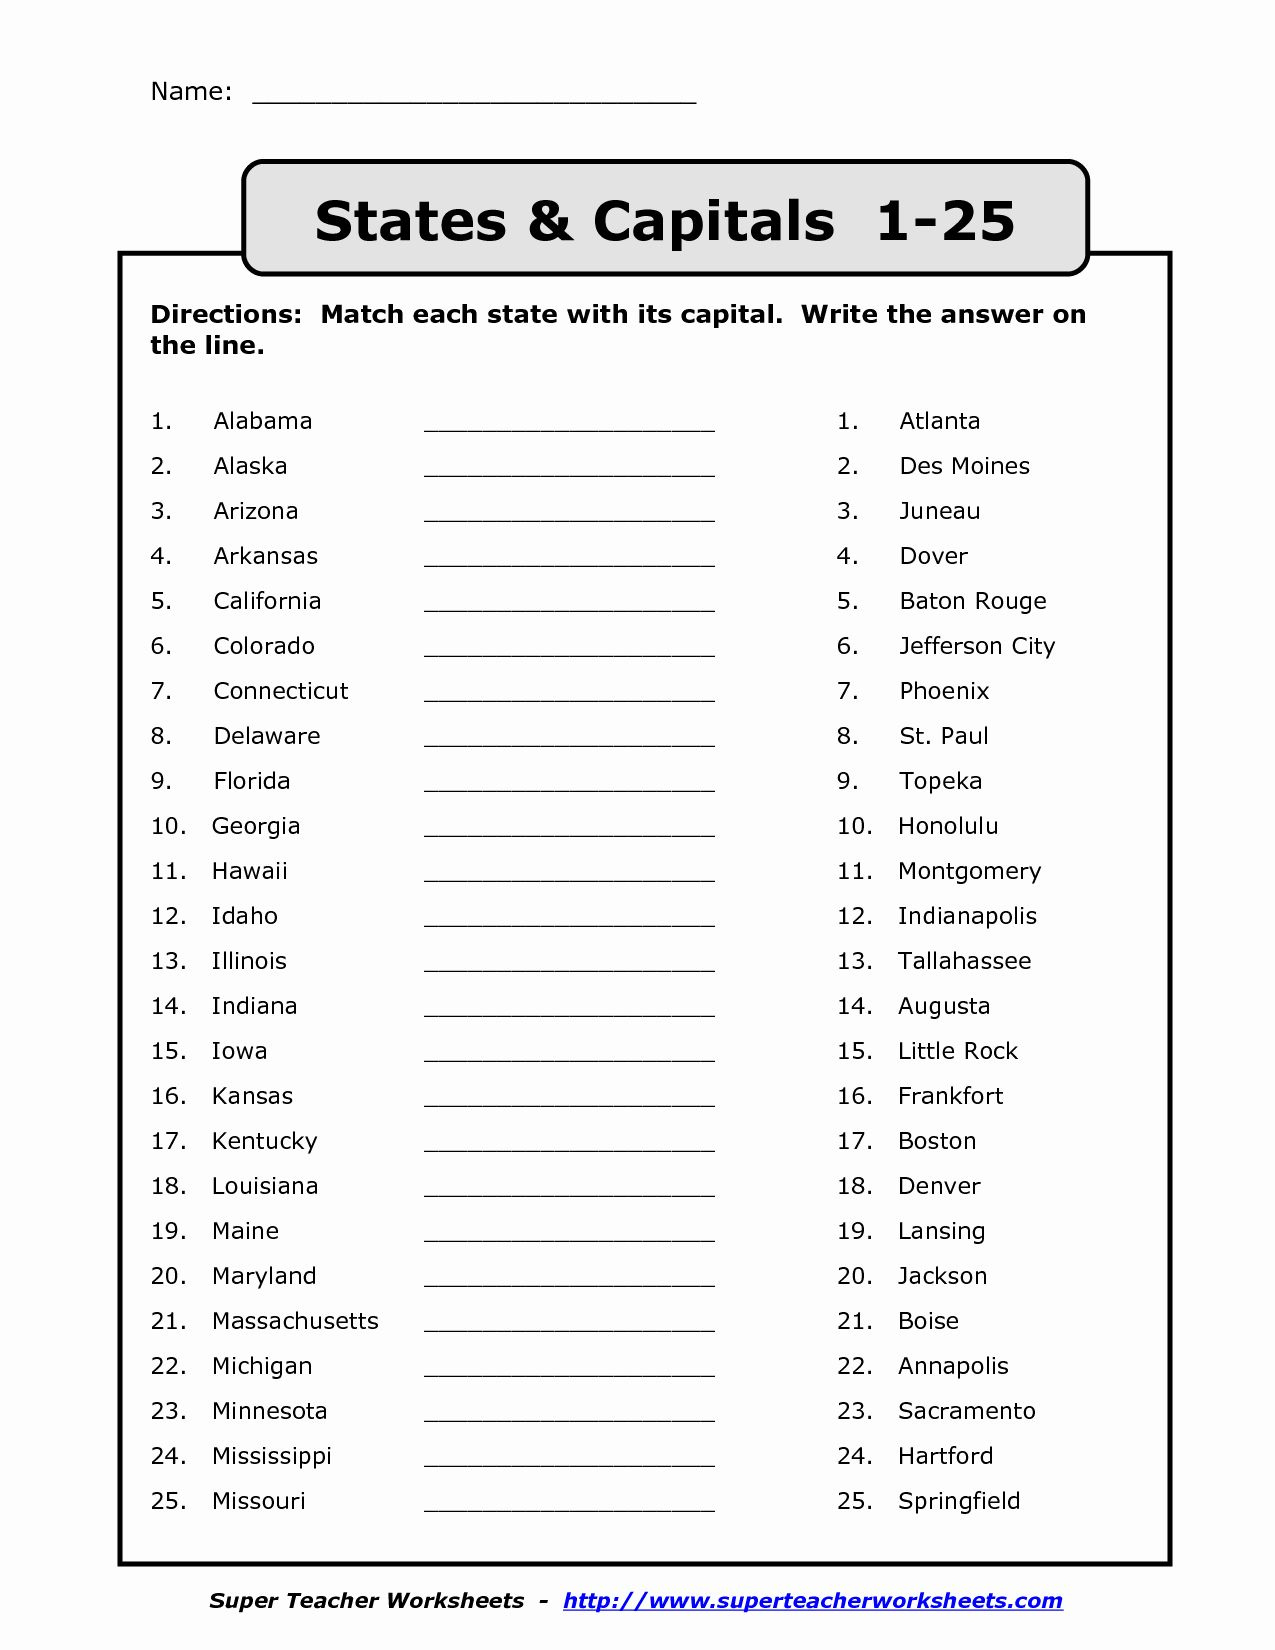 50 States And Capitals Matching Worksheet In 2020 States And Capitals 